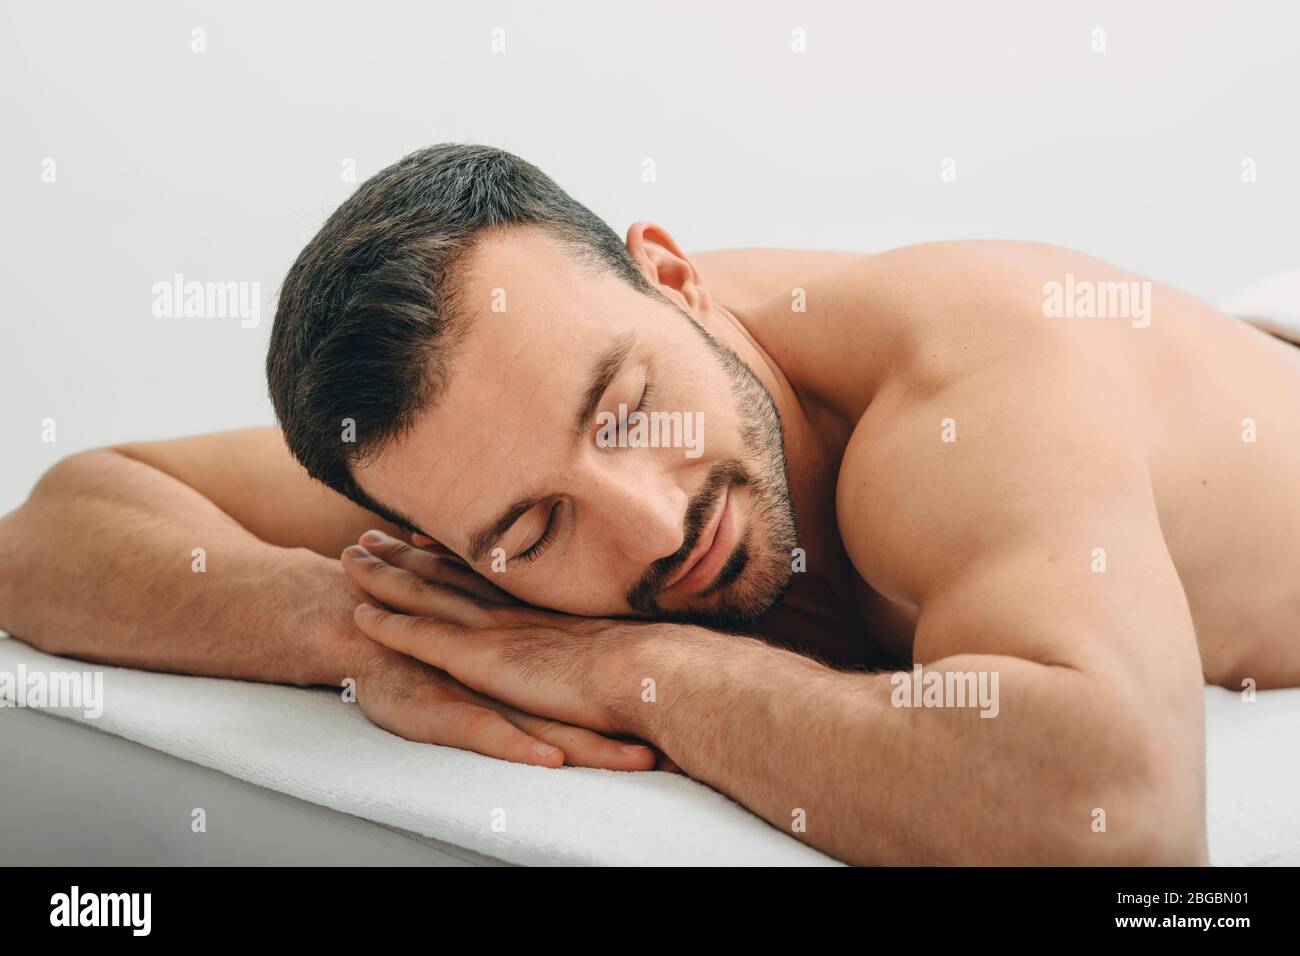 Caucasian man relaxes on massage table after relaxing in spa and massage. Stock Photo